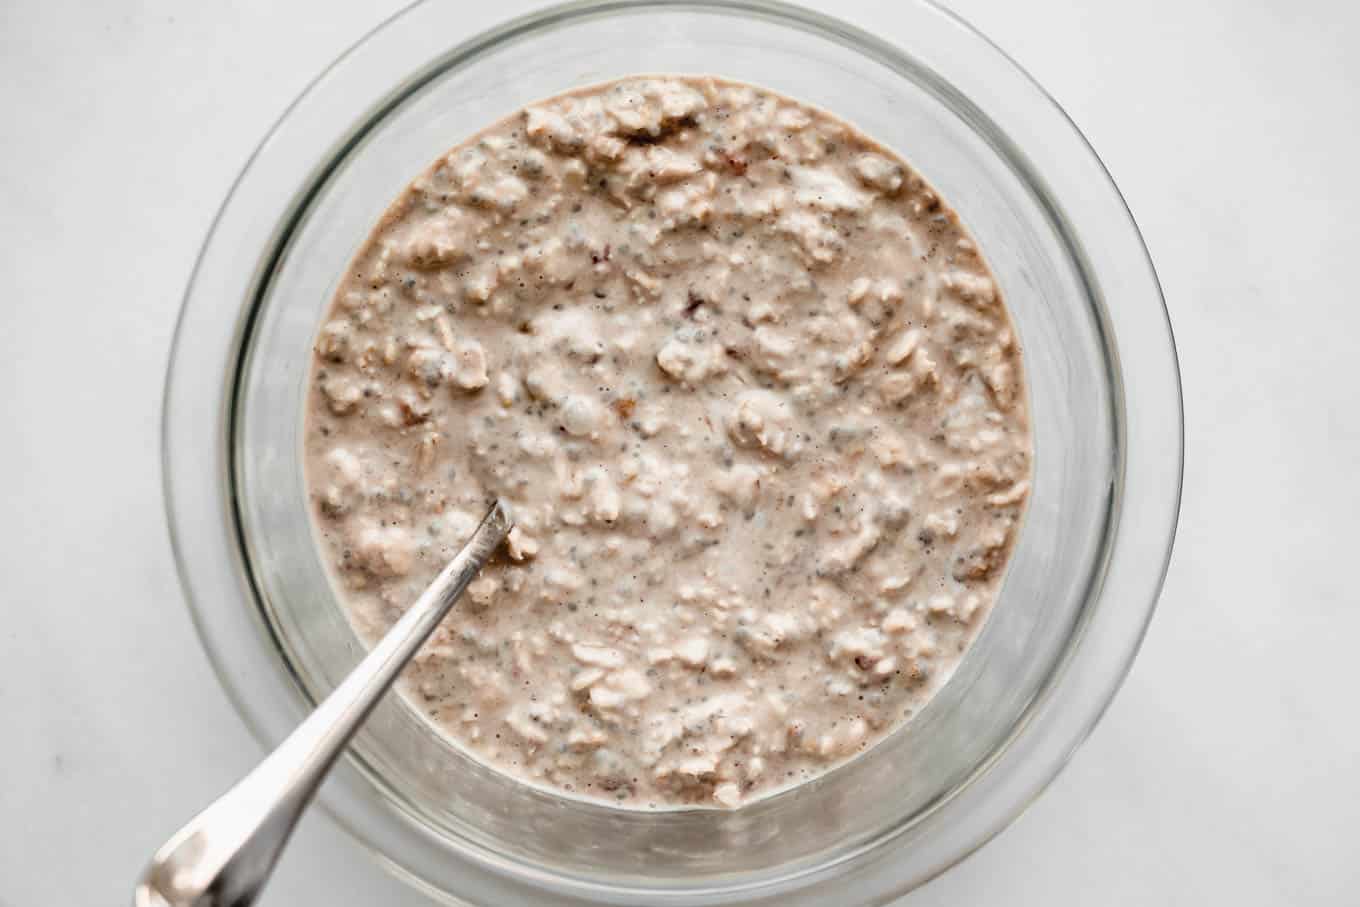 Peanut butter overnight oats in a mixing bowl